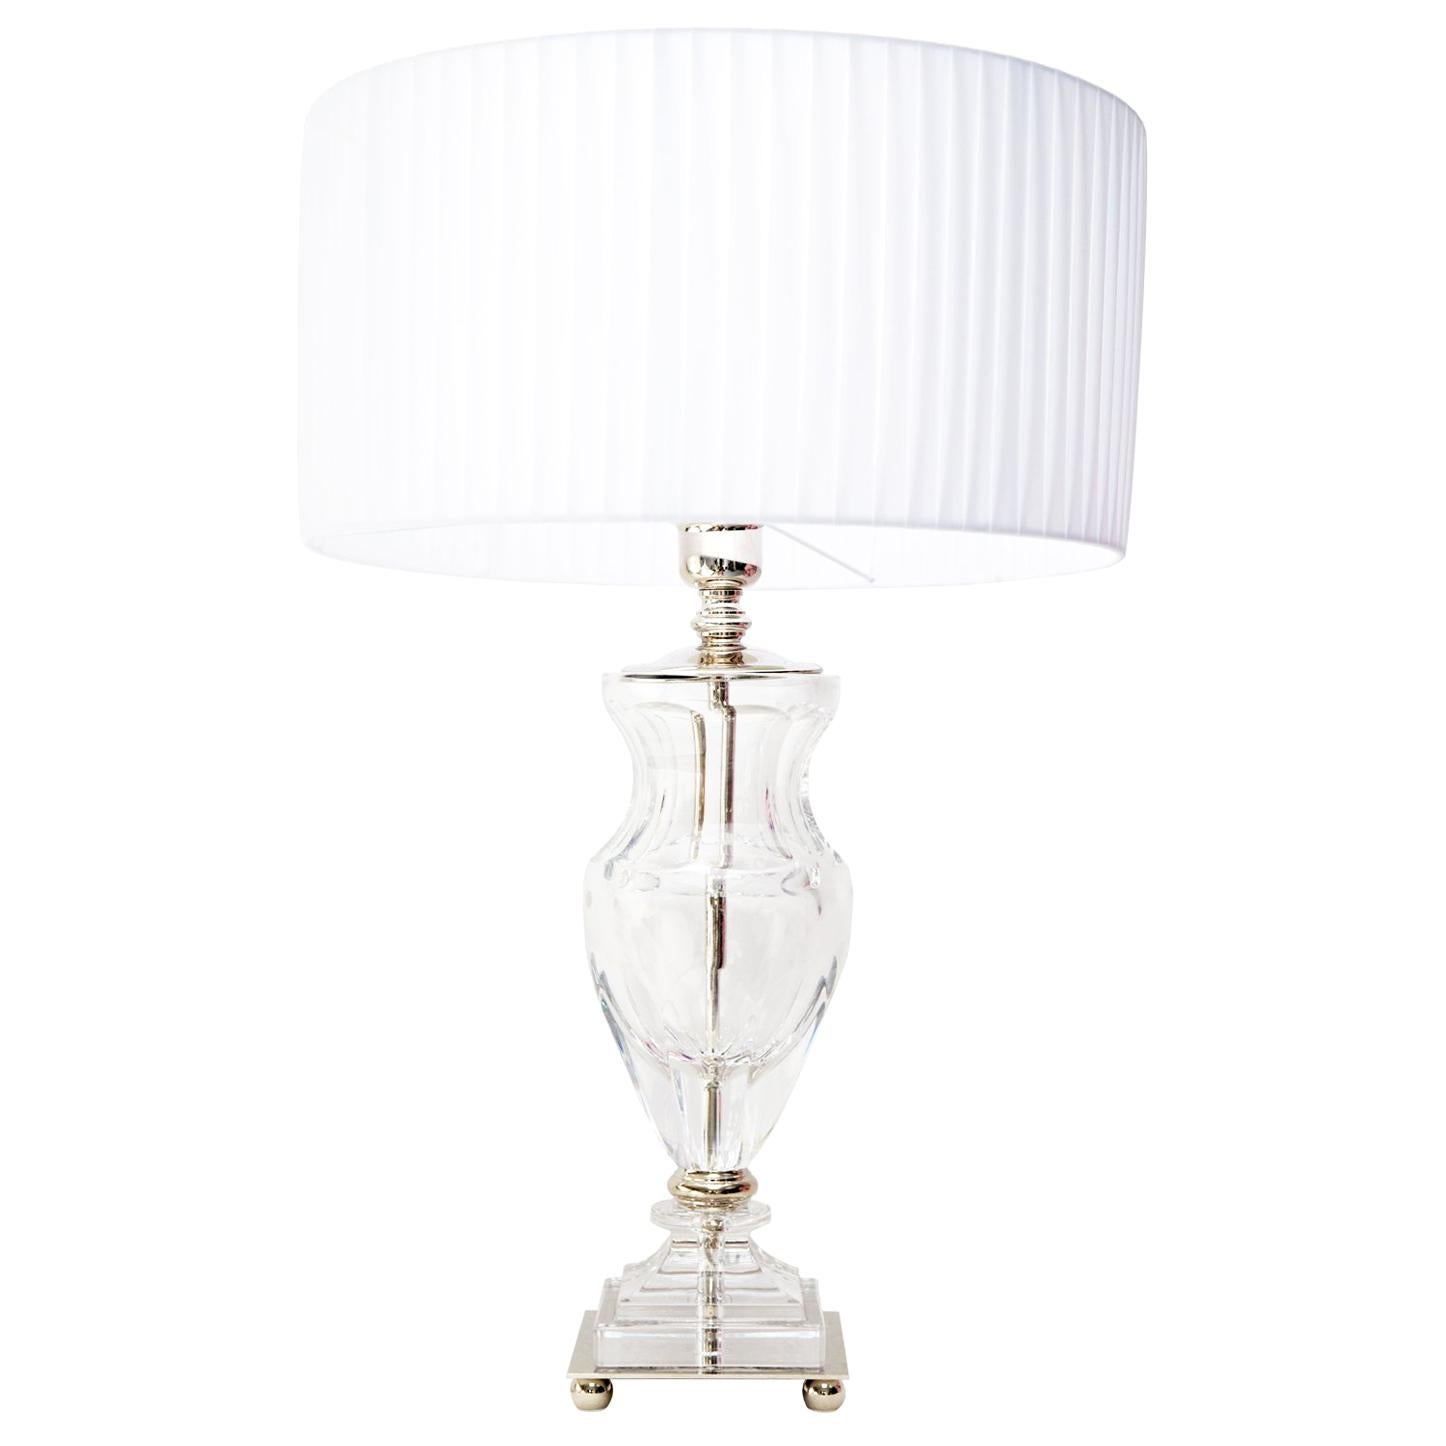 Ugo Poggi Firenze Handcrafted Crystal Table Lamp Olmo For Sale